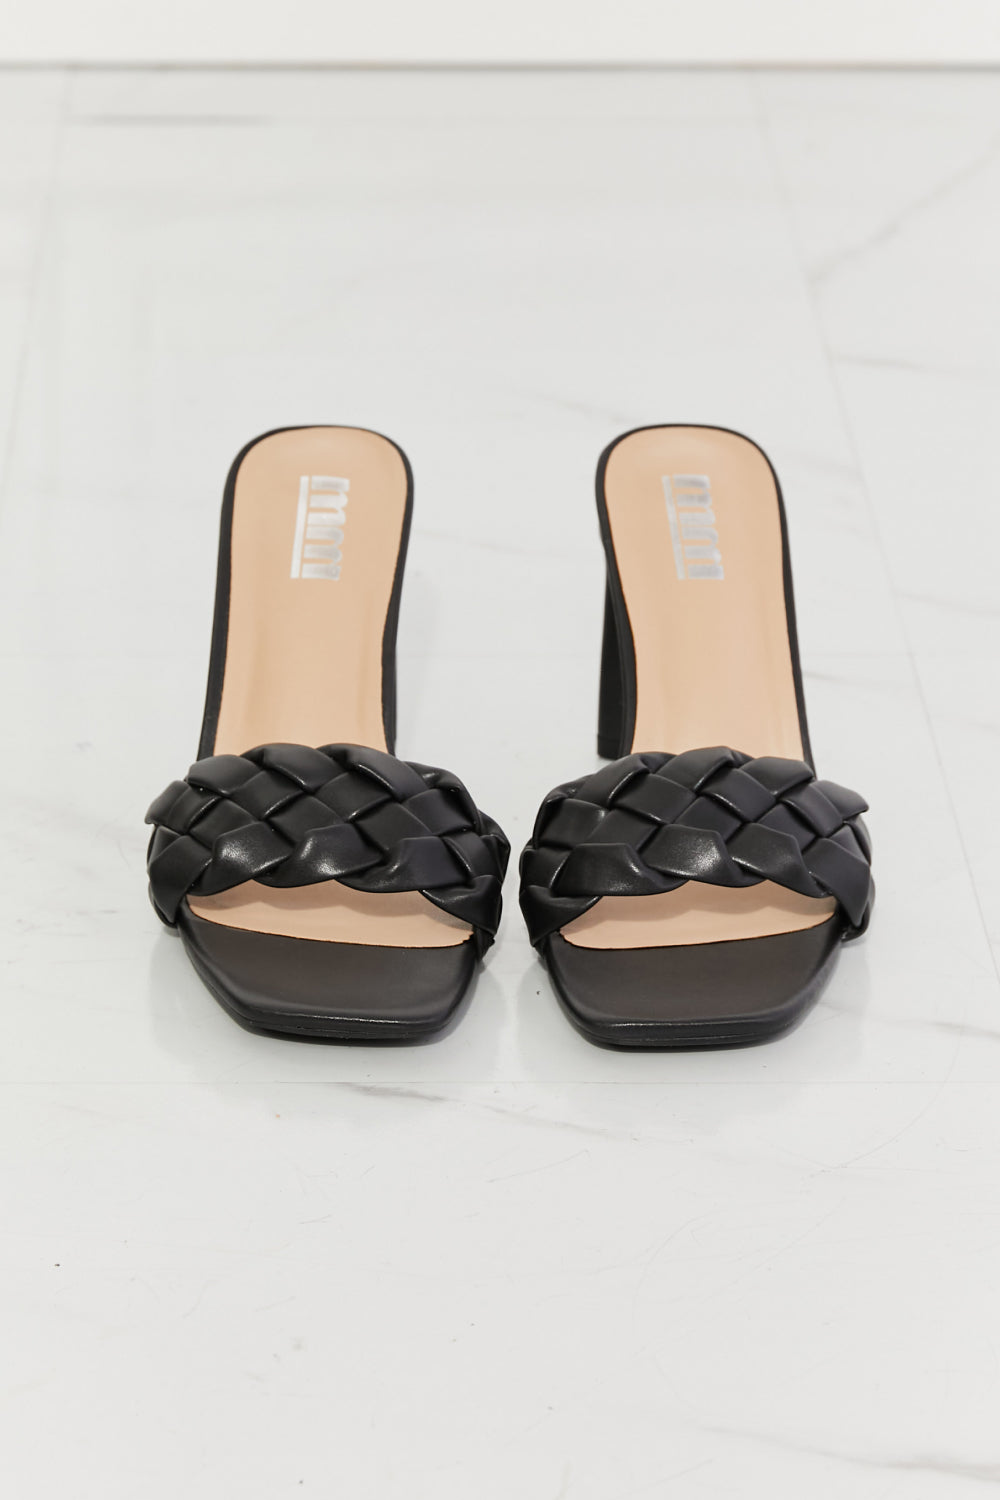 MMShoes Top of the World Braided Block Heel Sandals in Black - Tigbul's Fashion